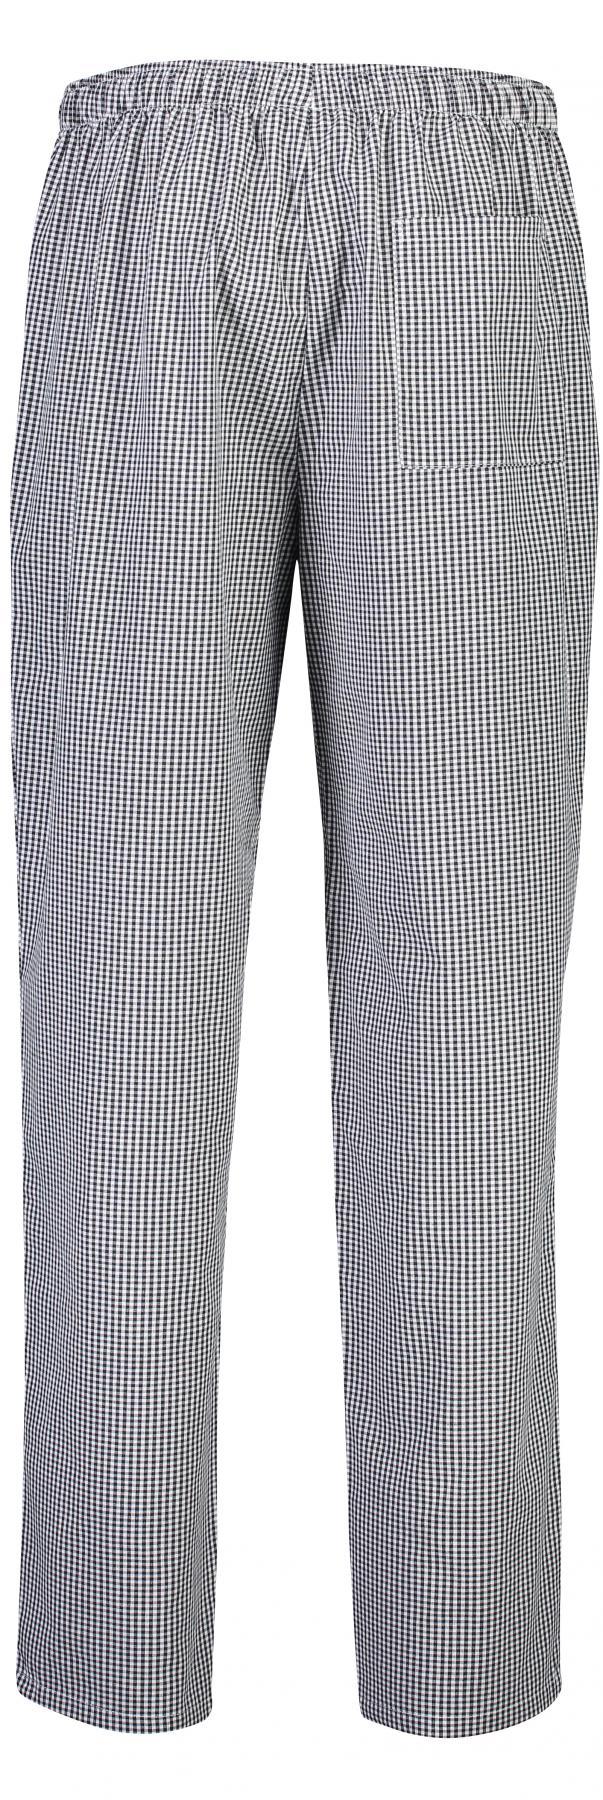 Pulltop Trousers